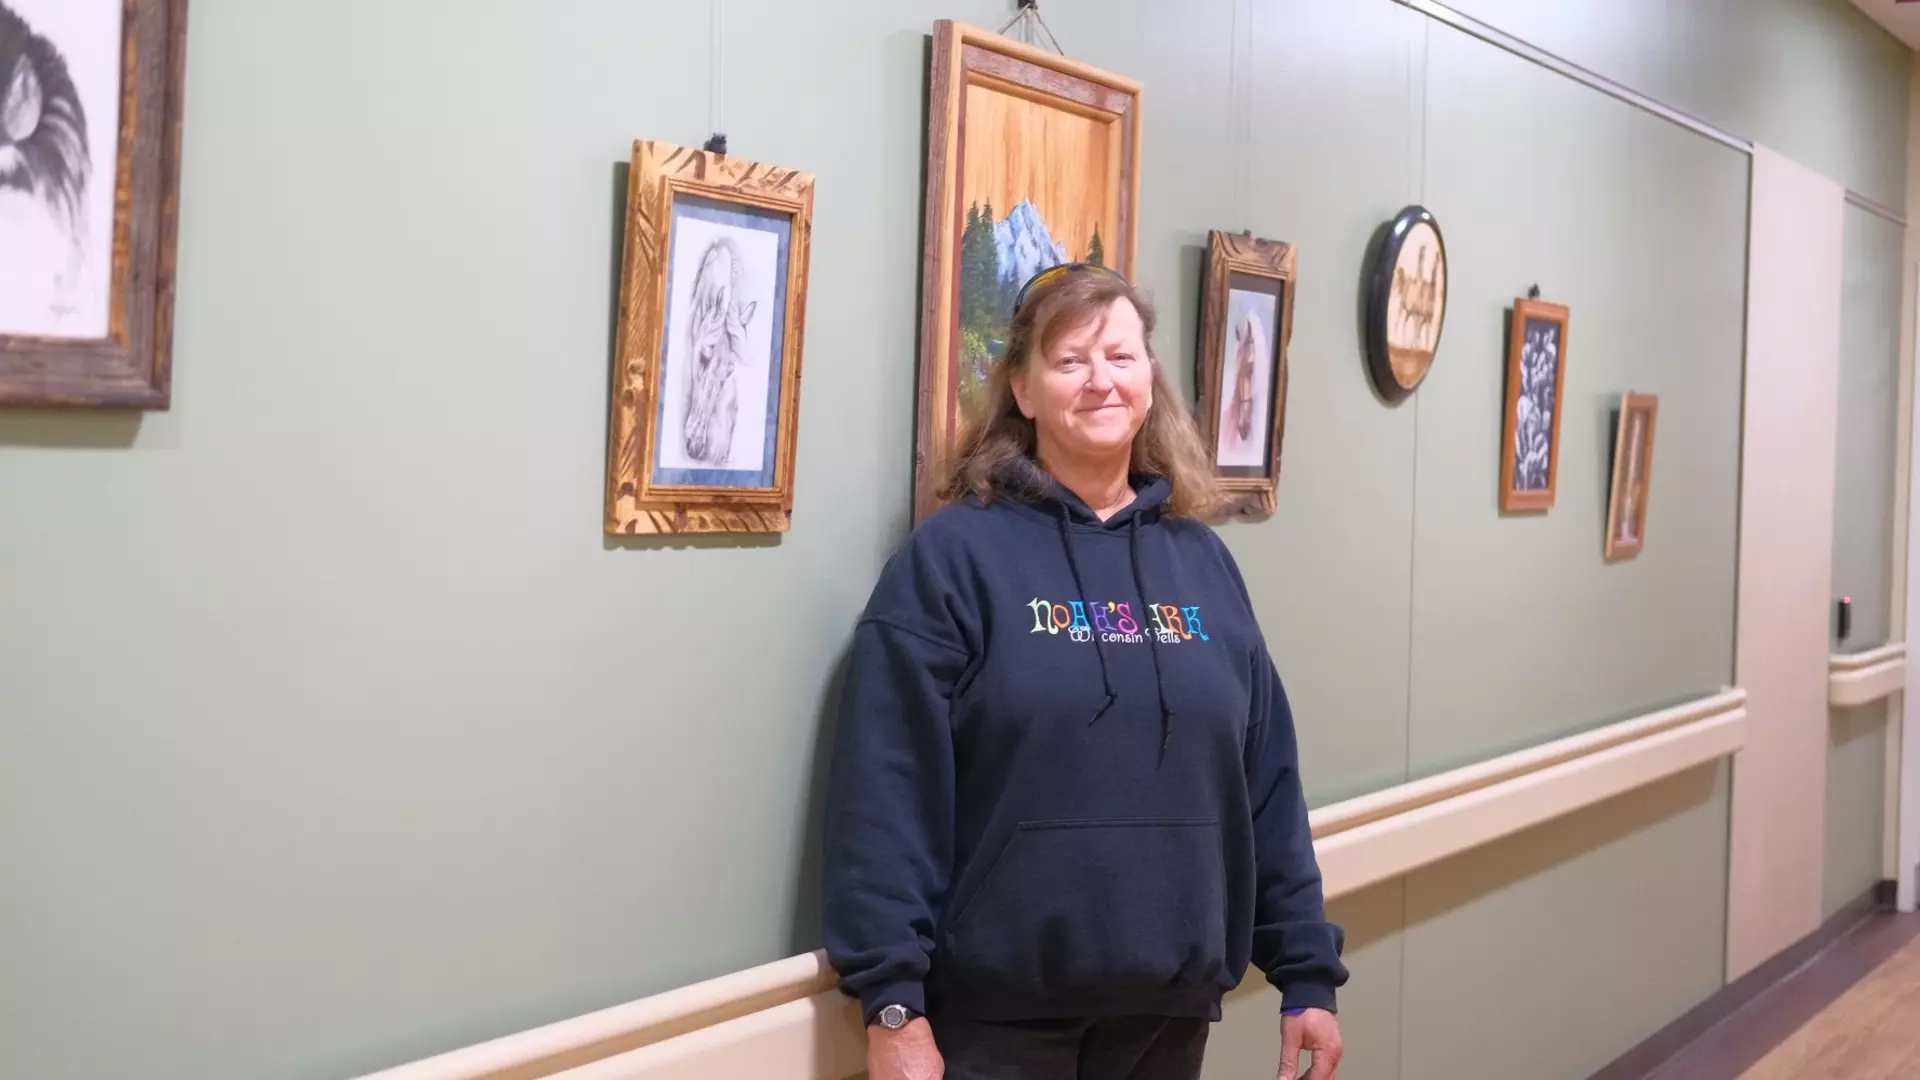 Woman standing next to artwork in hospital hallway.